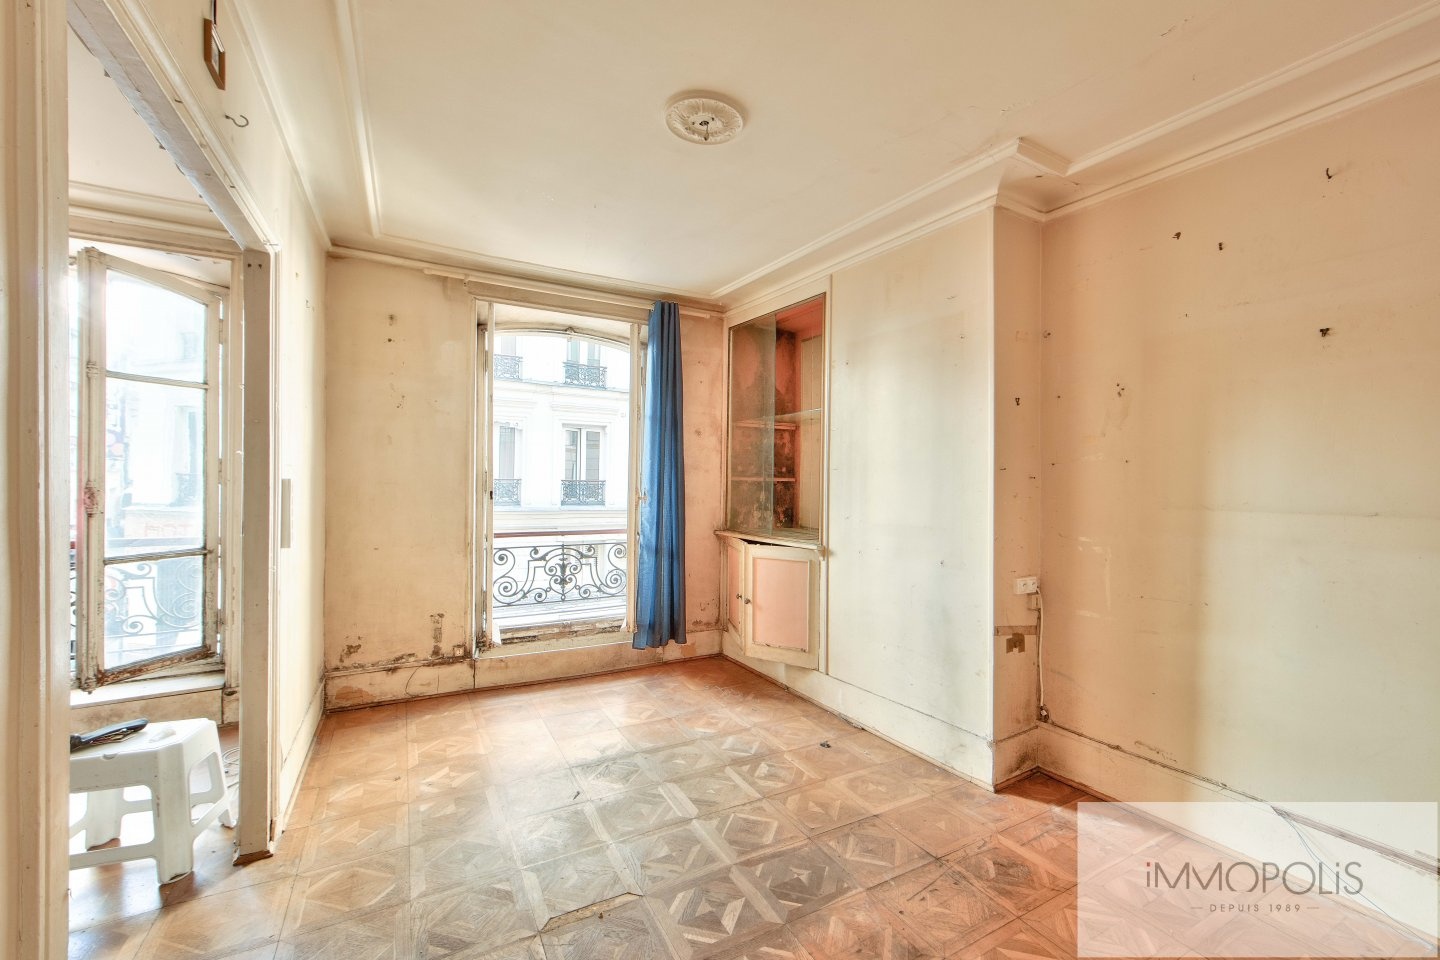 Apartment to be renovated in the heart of the abbesses. 7